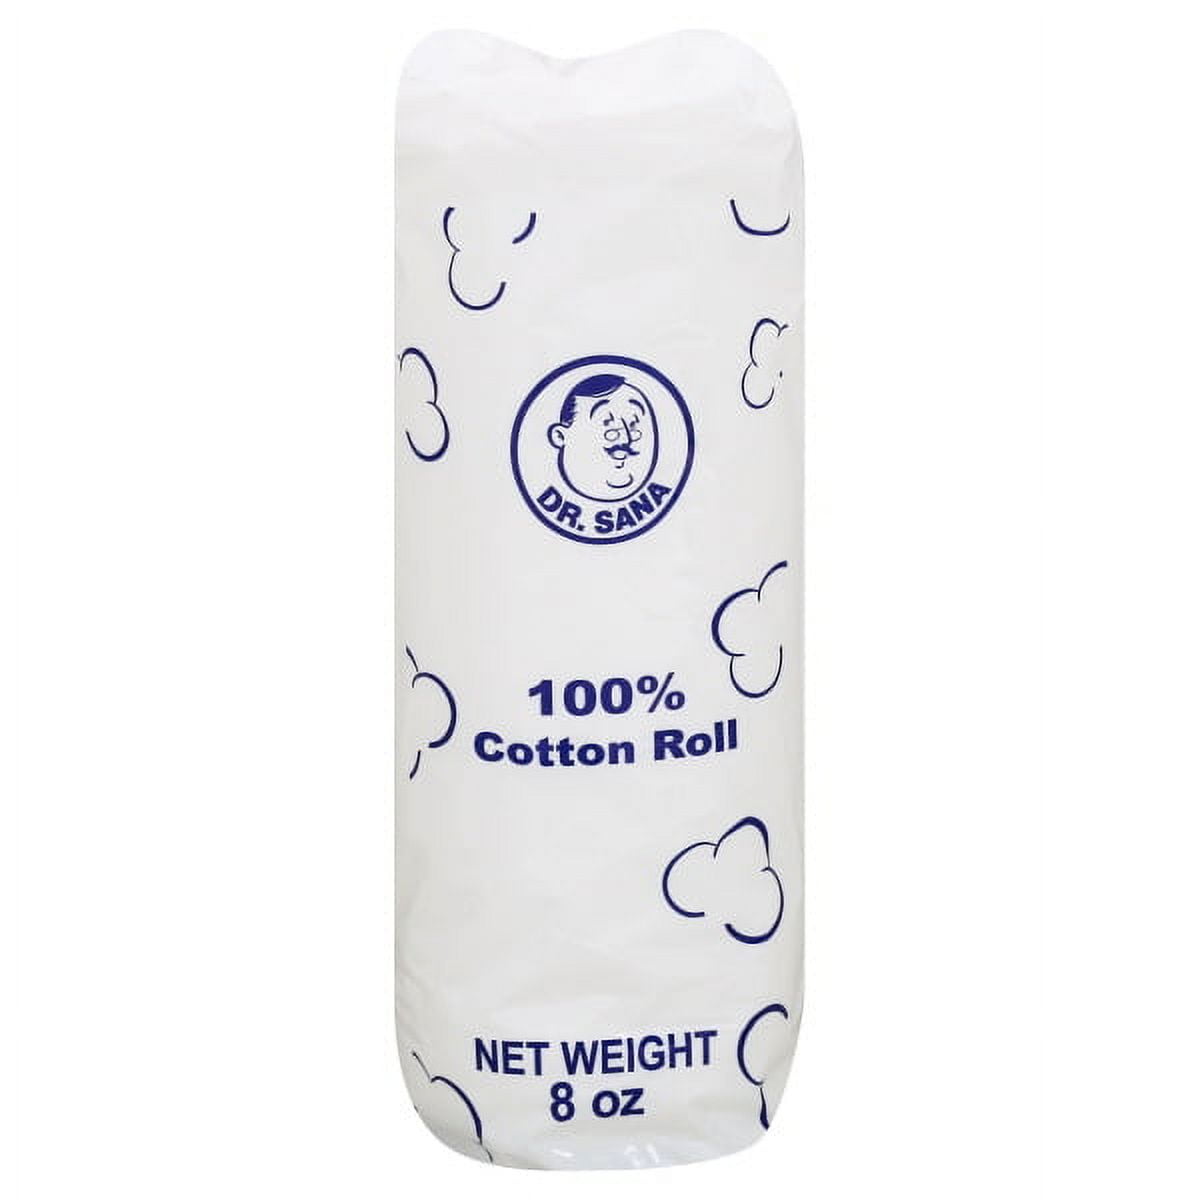 Cotton Roll Practical